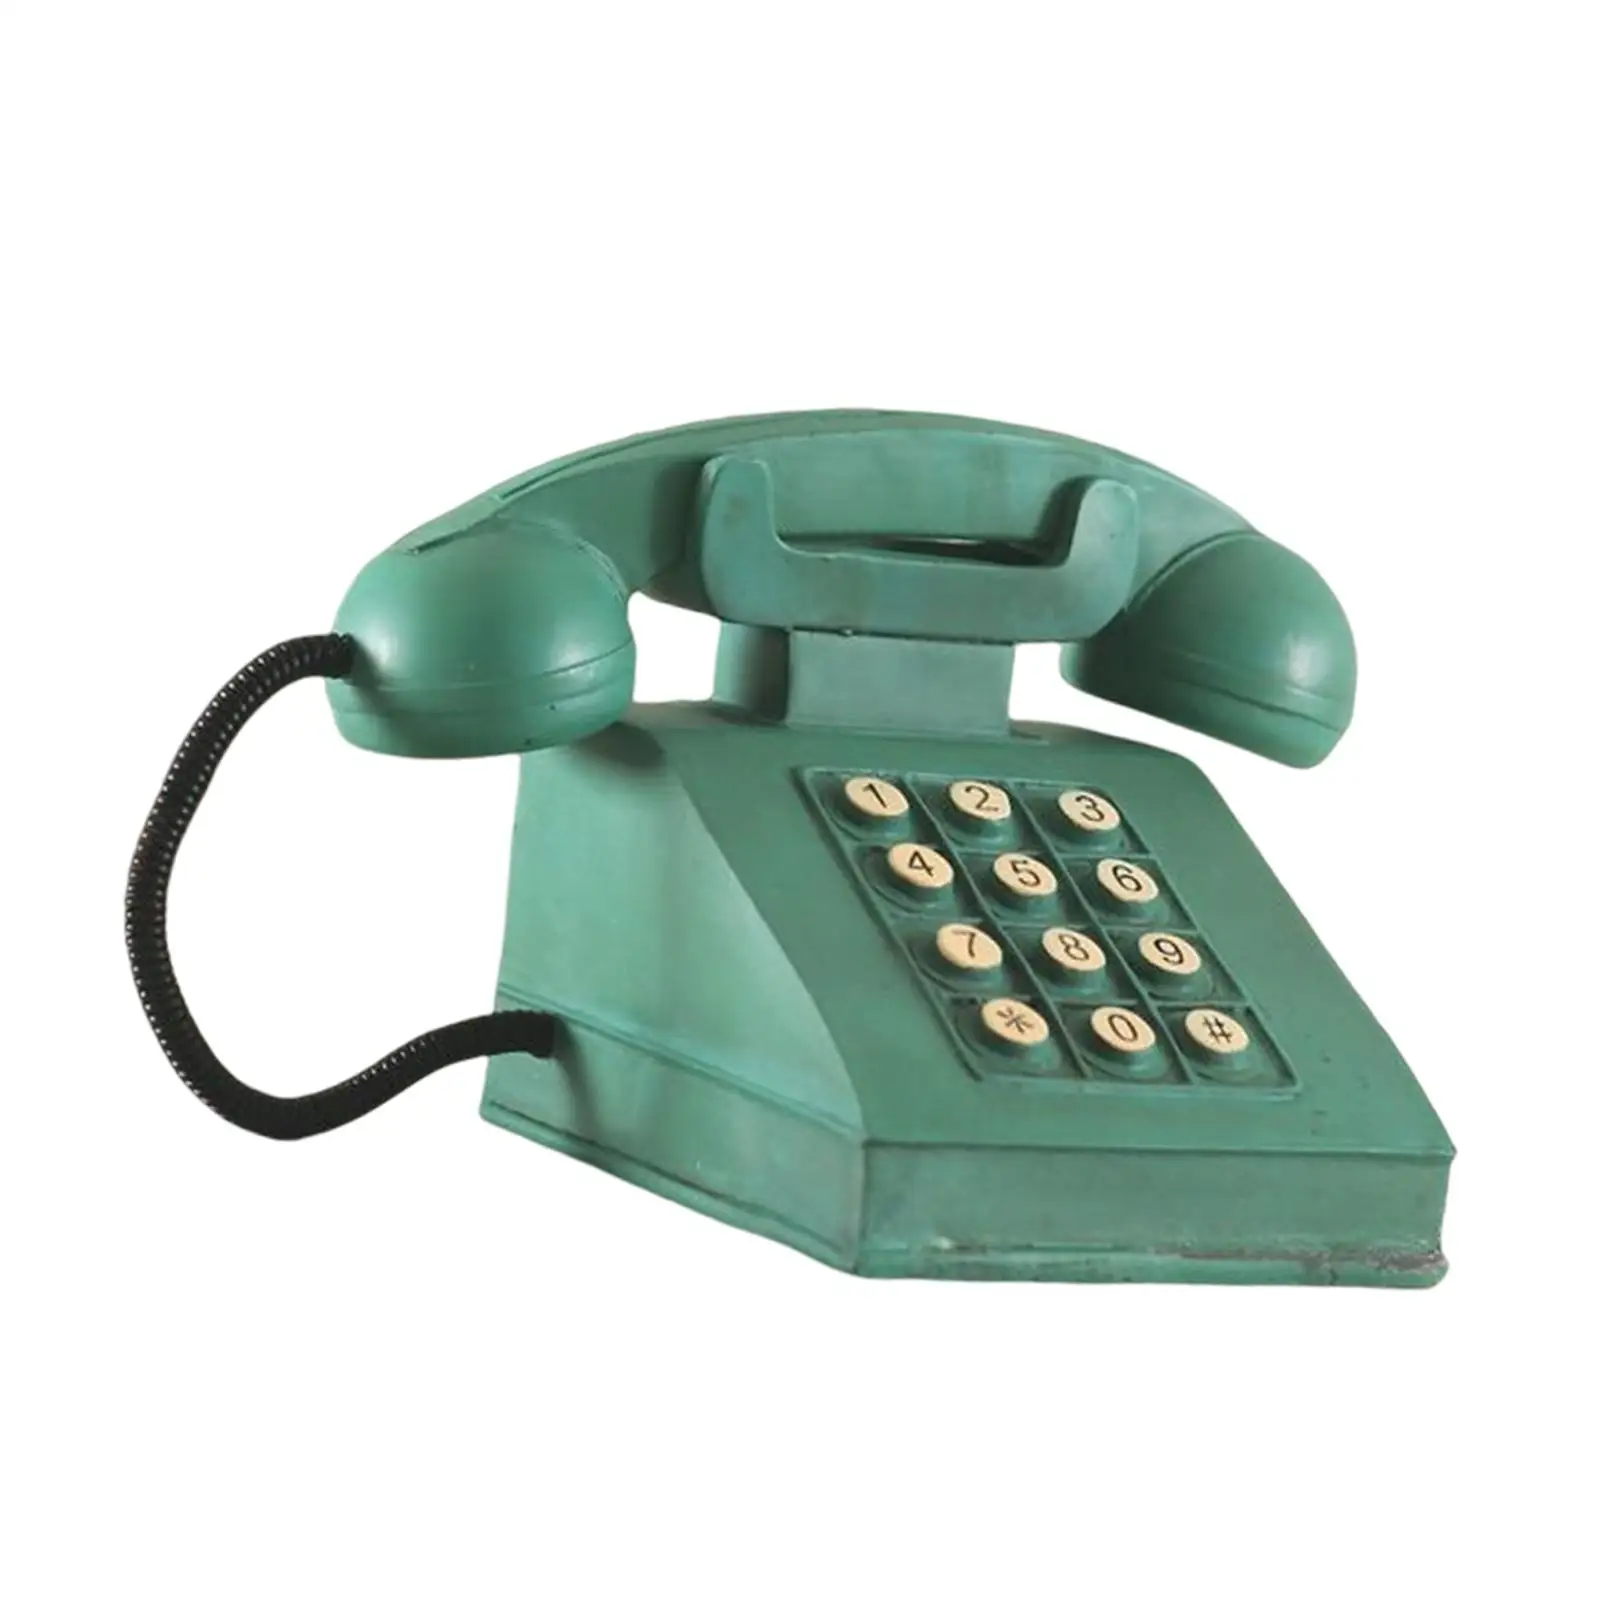 Classic American Telephone Model Statue Resin Craft for Store Room Desktop Home Decor